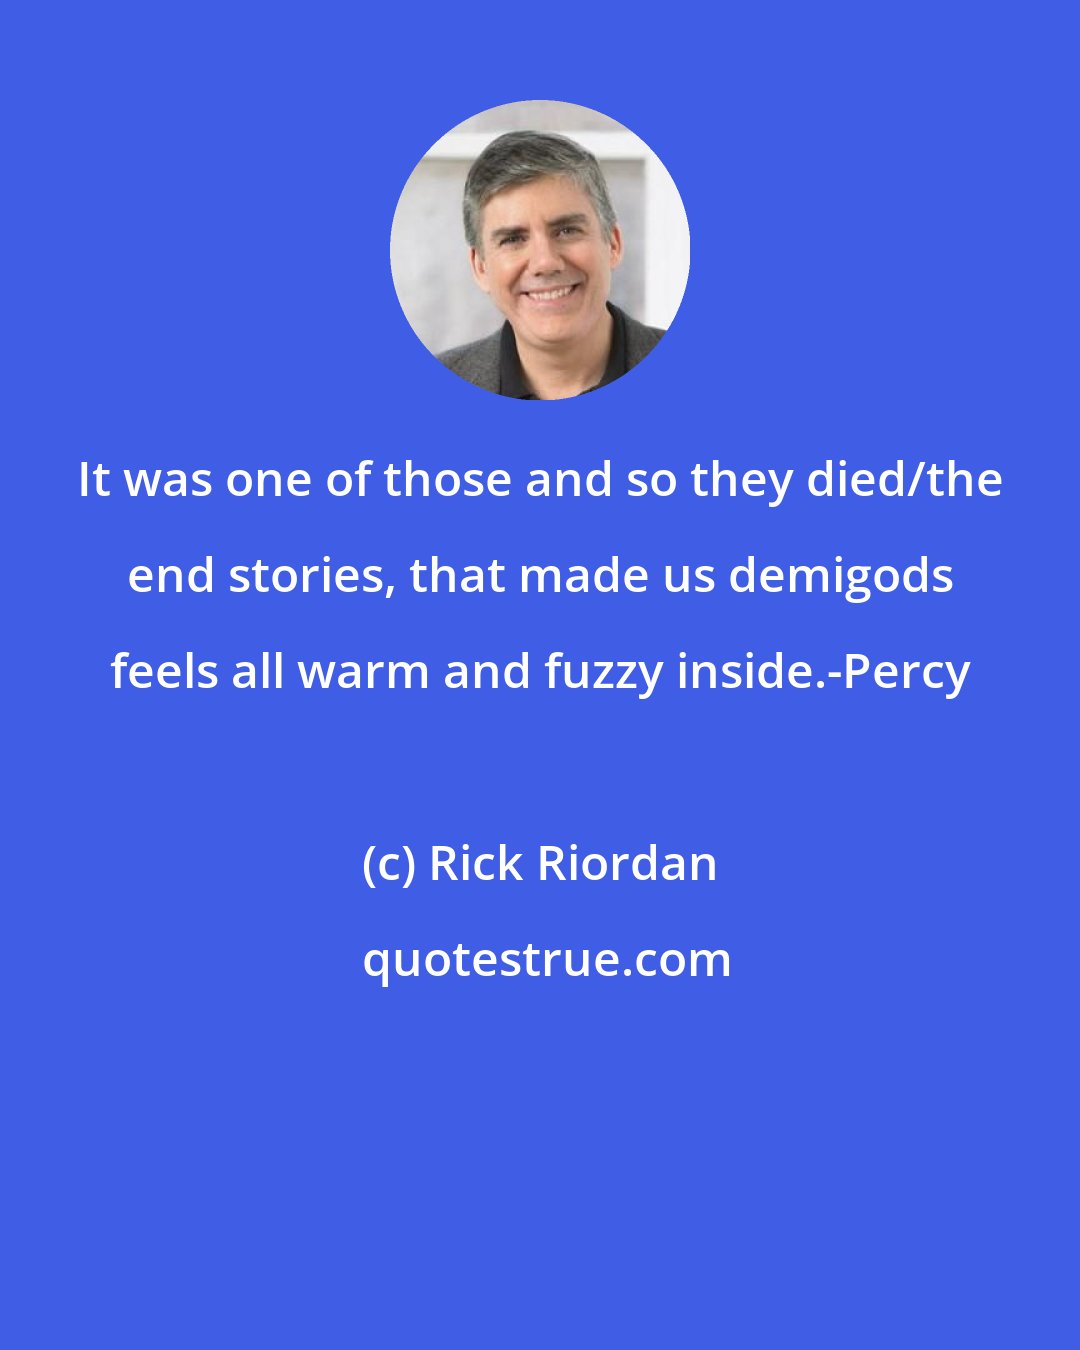 Rick Riordan: It was one of those and so they died/the end stories, that made us demigods feels all warm and fuzzy inside.-Percy